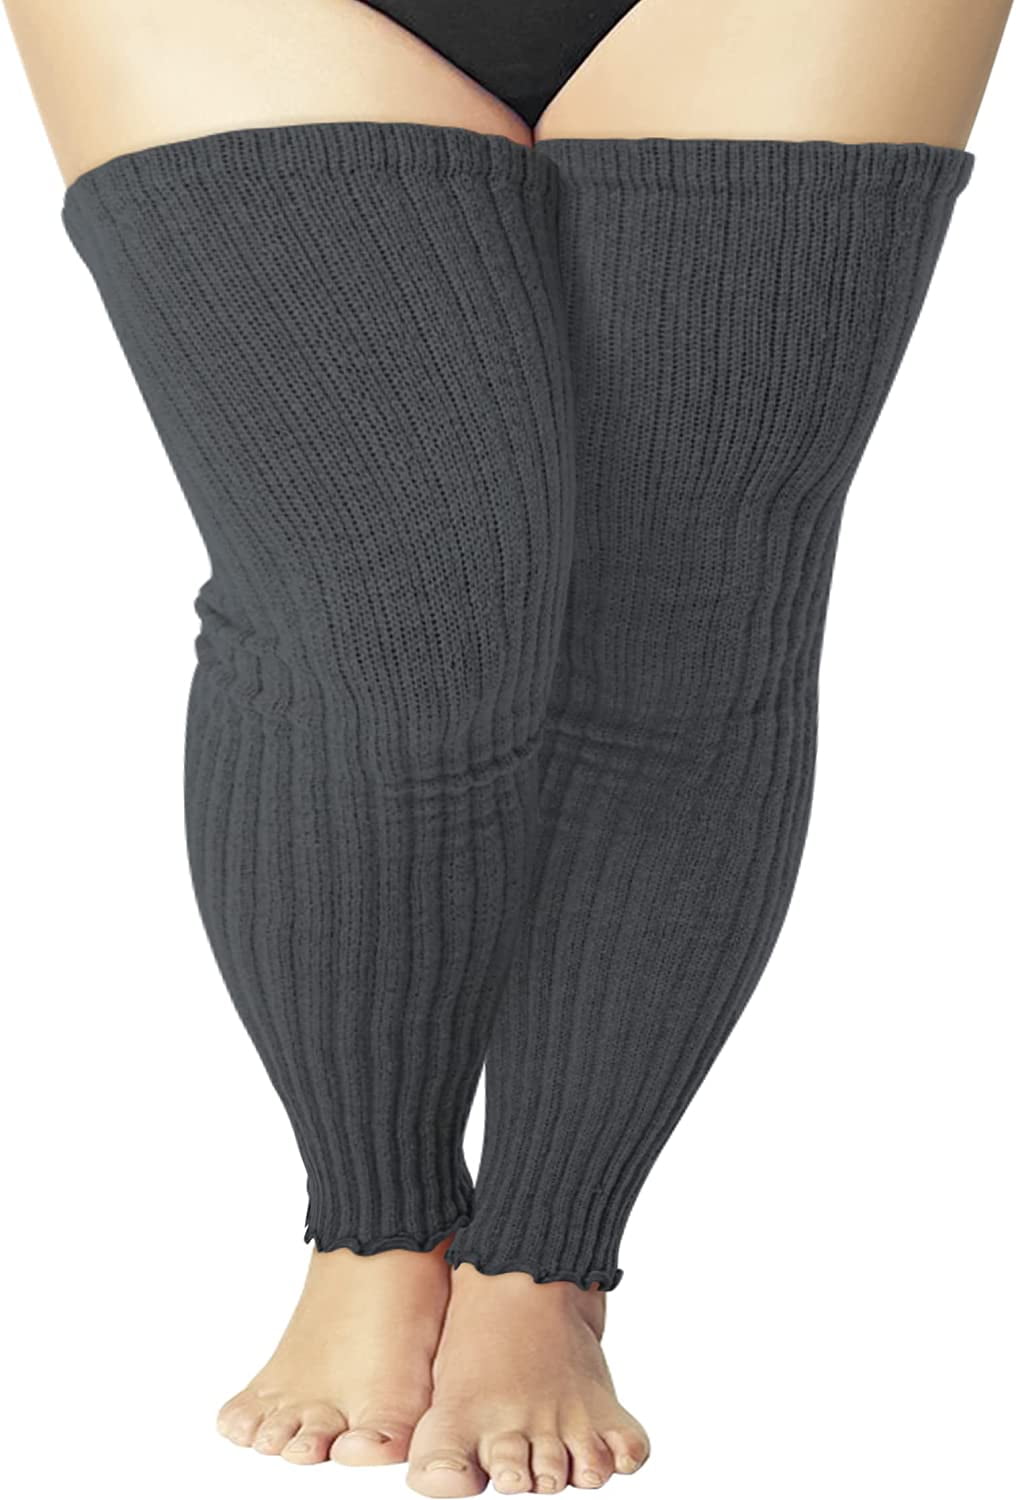 Women's Plus Size Warmers Knit Over Knee High Footless for Thighs - Walmart.com